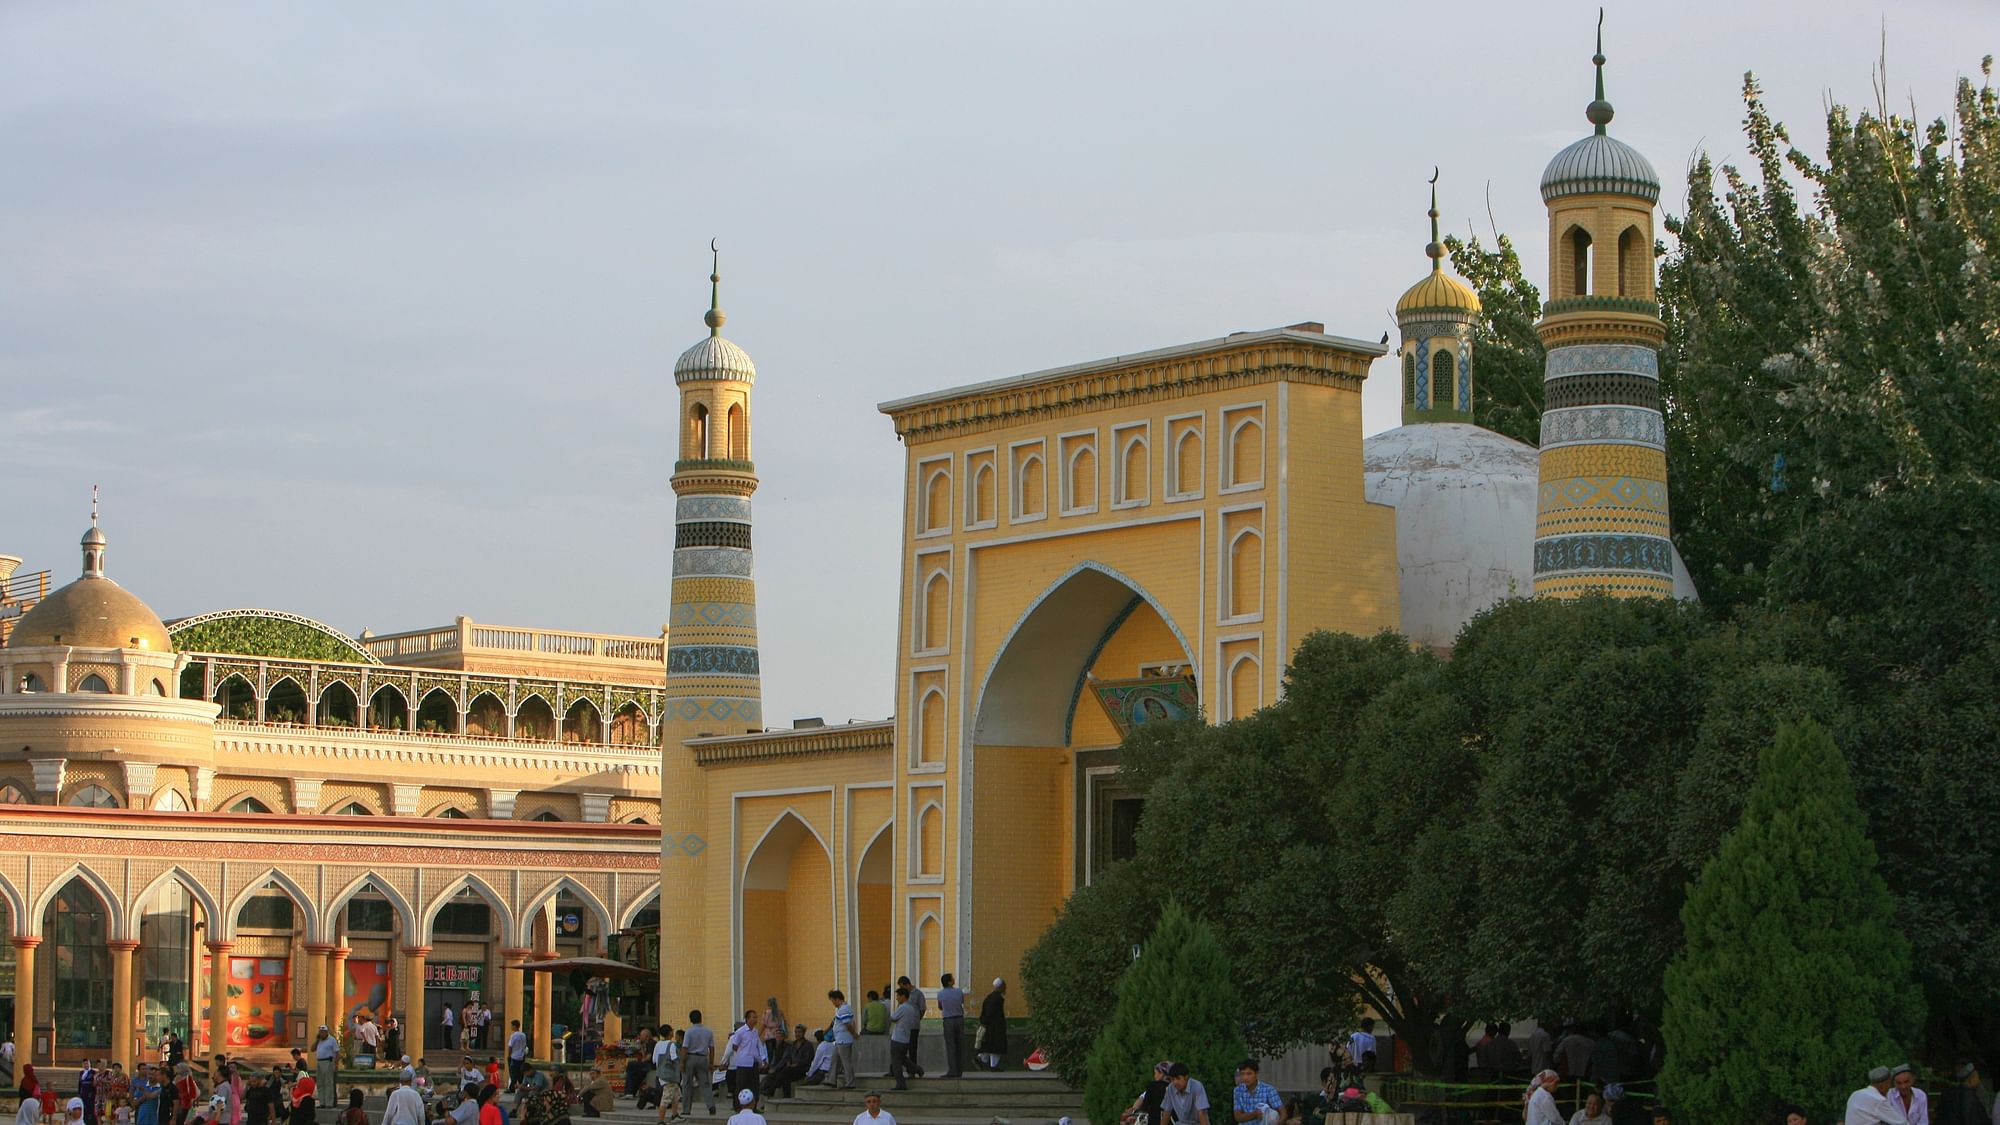 <div class="paragraphs"><p>The Id Kah is the main Mosque in Kashgar, Xinjiang, and the largest in China.</p><p>Image used for representational purposes only.&nbsp;</p></div>